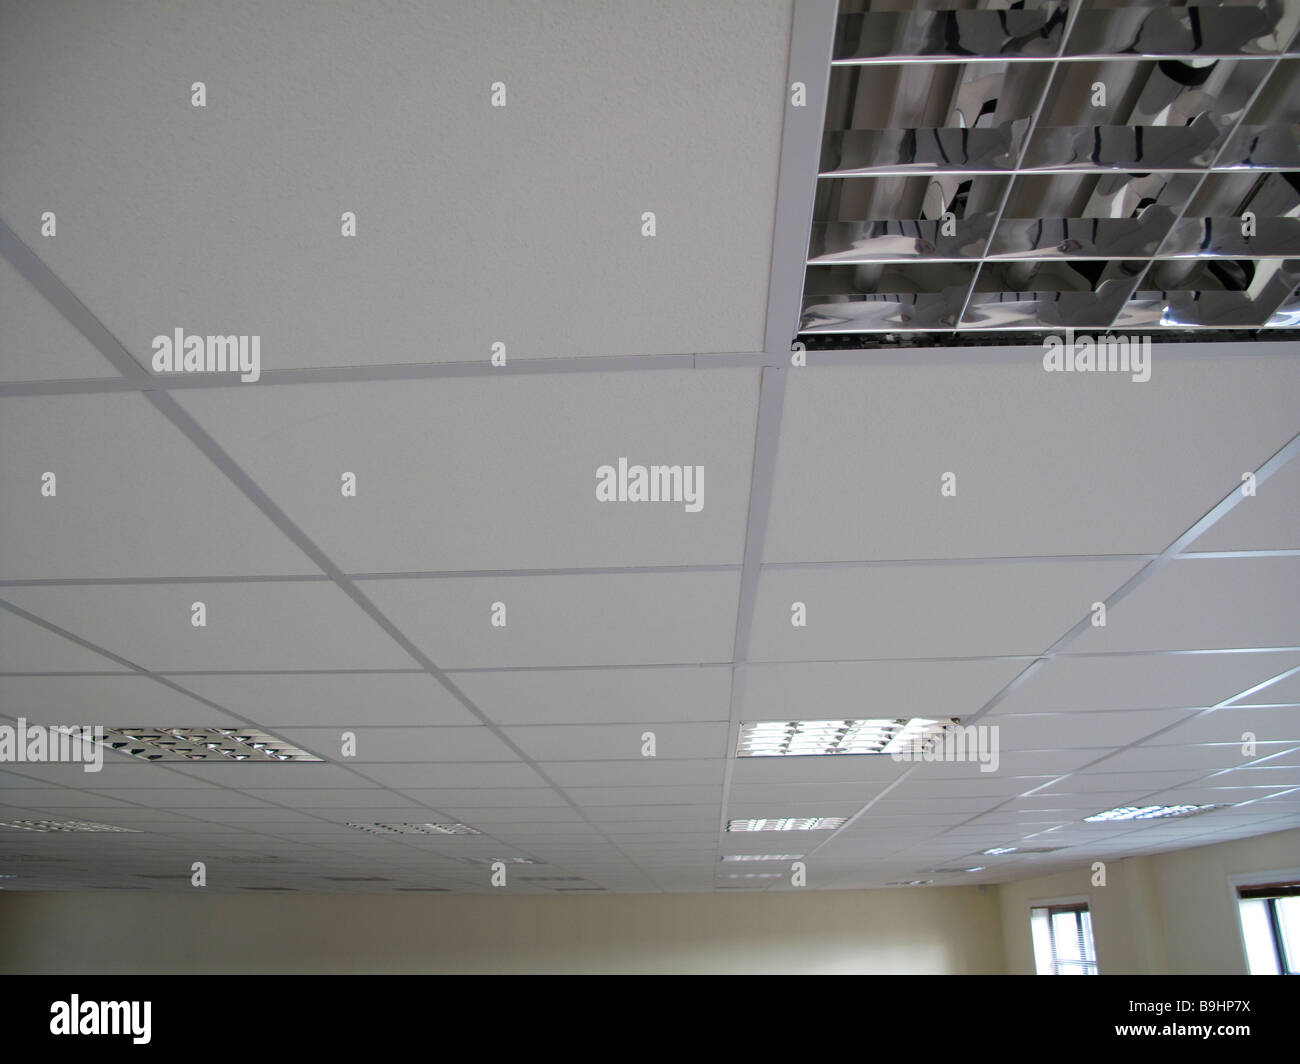 Inset Ceiling Lights Stock Photos Inset Ceiling Lights Stock